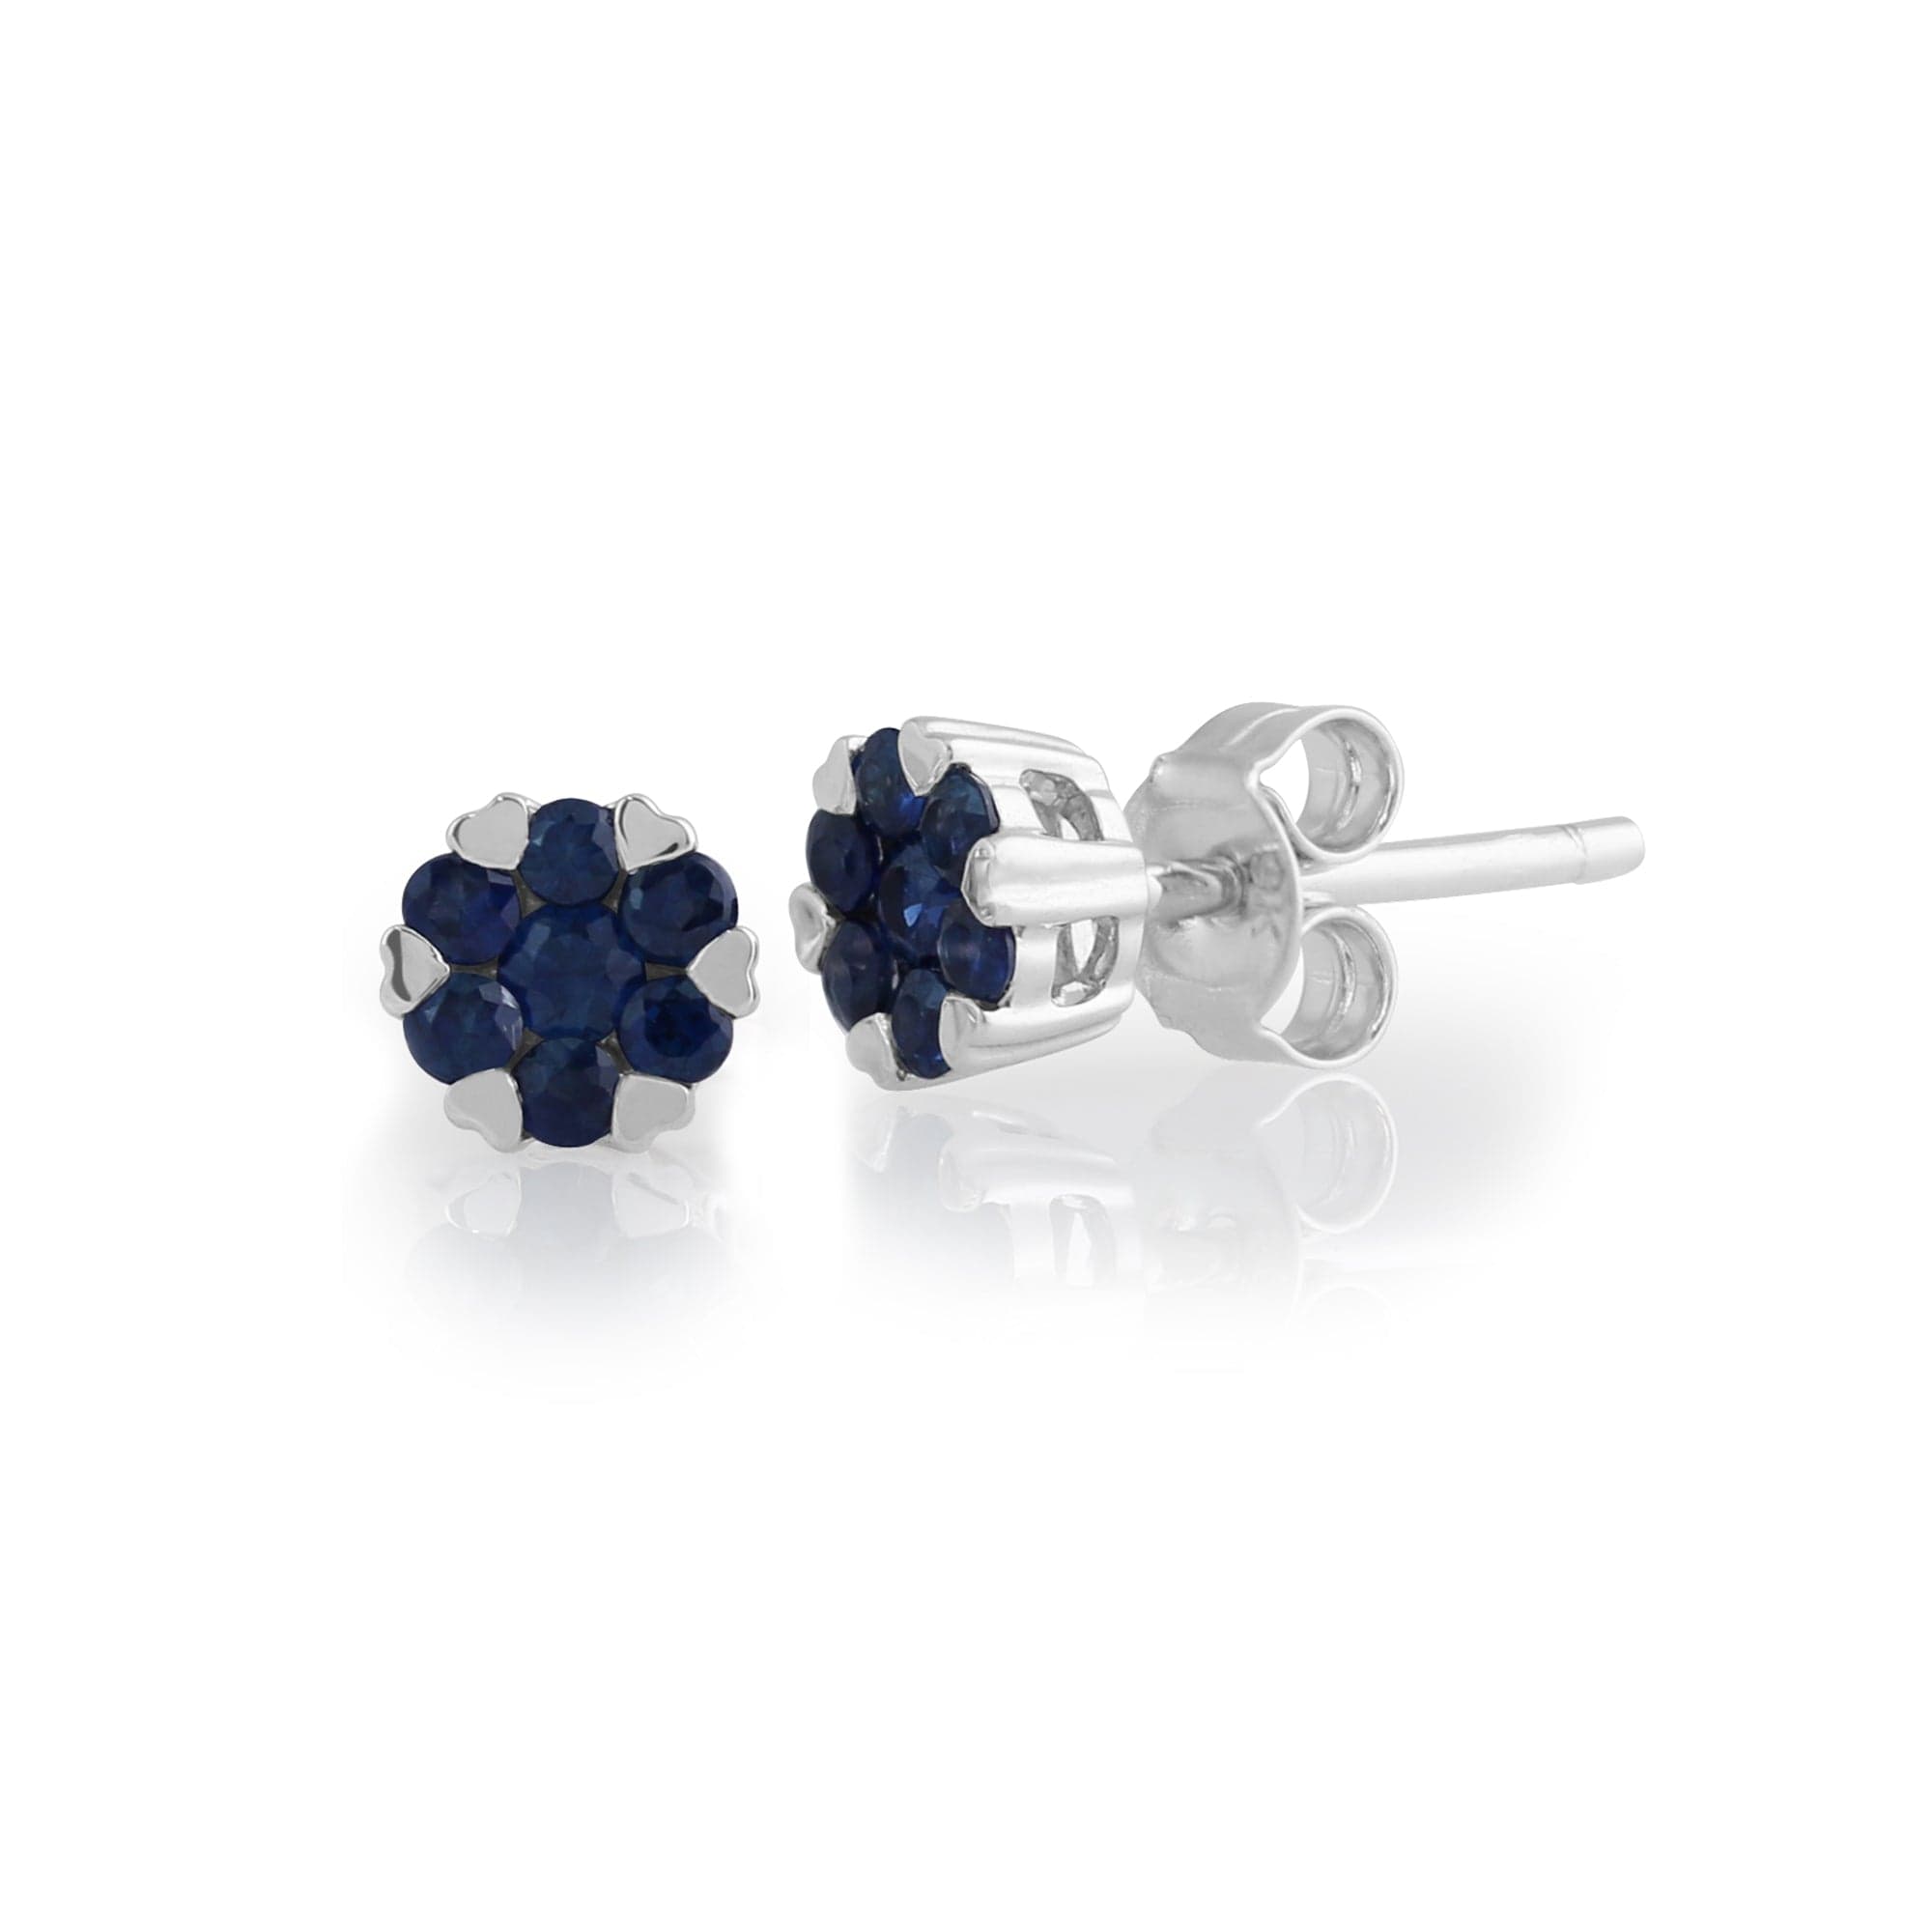 Gemondo 9ct White Gold 0.34ct Sapphire Floral Cluster Stud Earrings Image